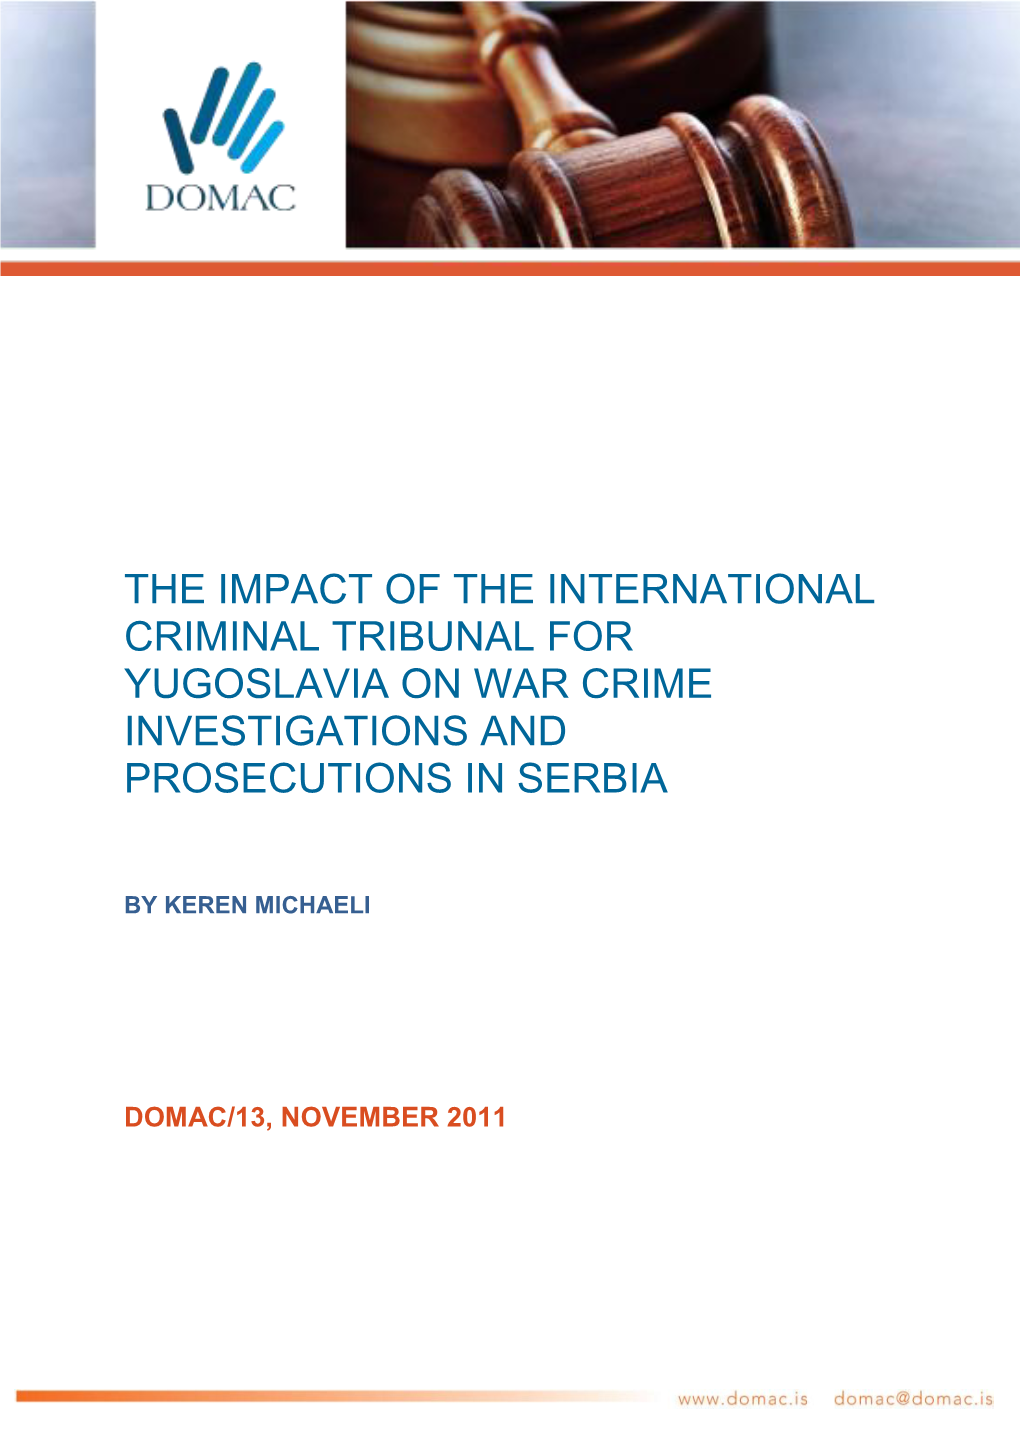 The Impact of the International Criminal Tribunal for Yugoslavia on War Crime Investigations and Prosecutions in Serbia